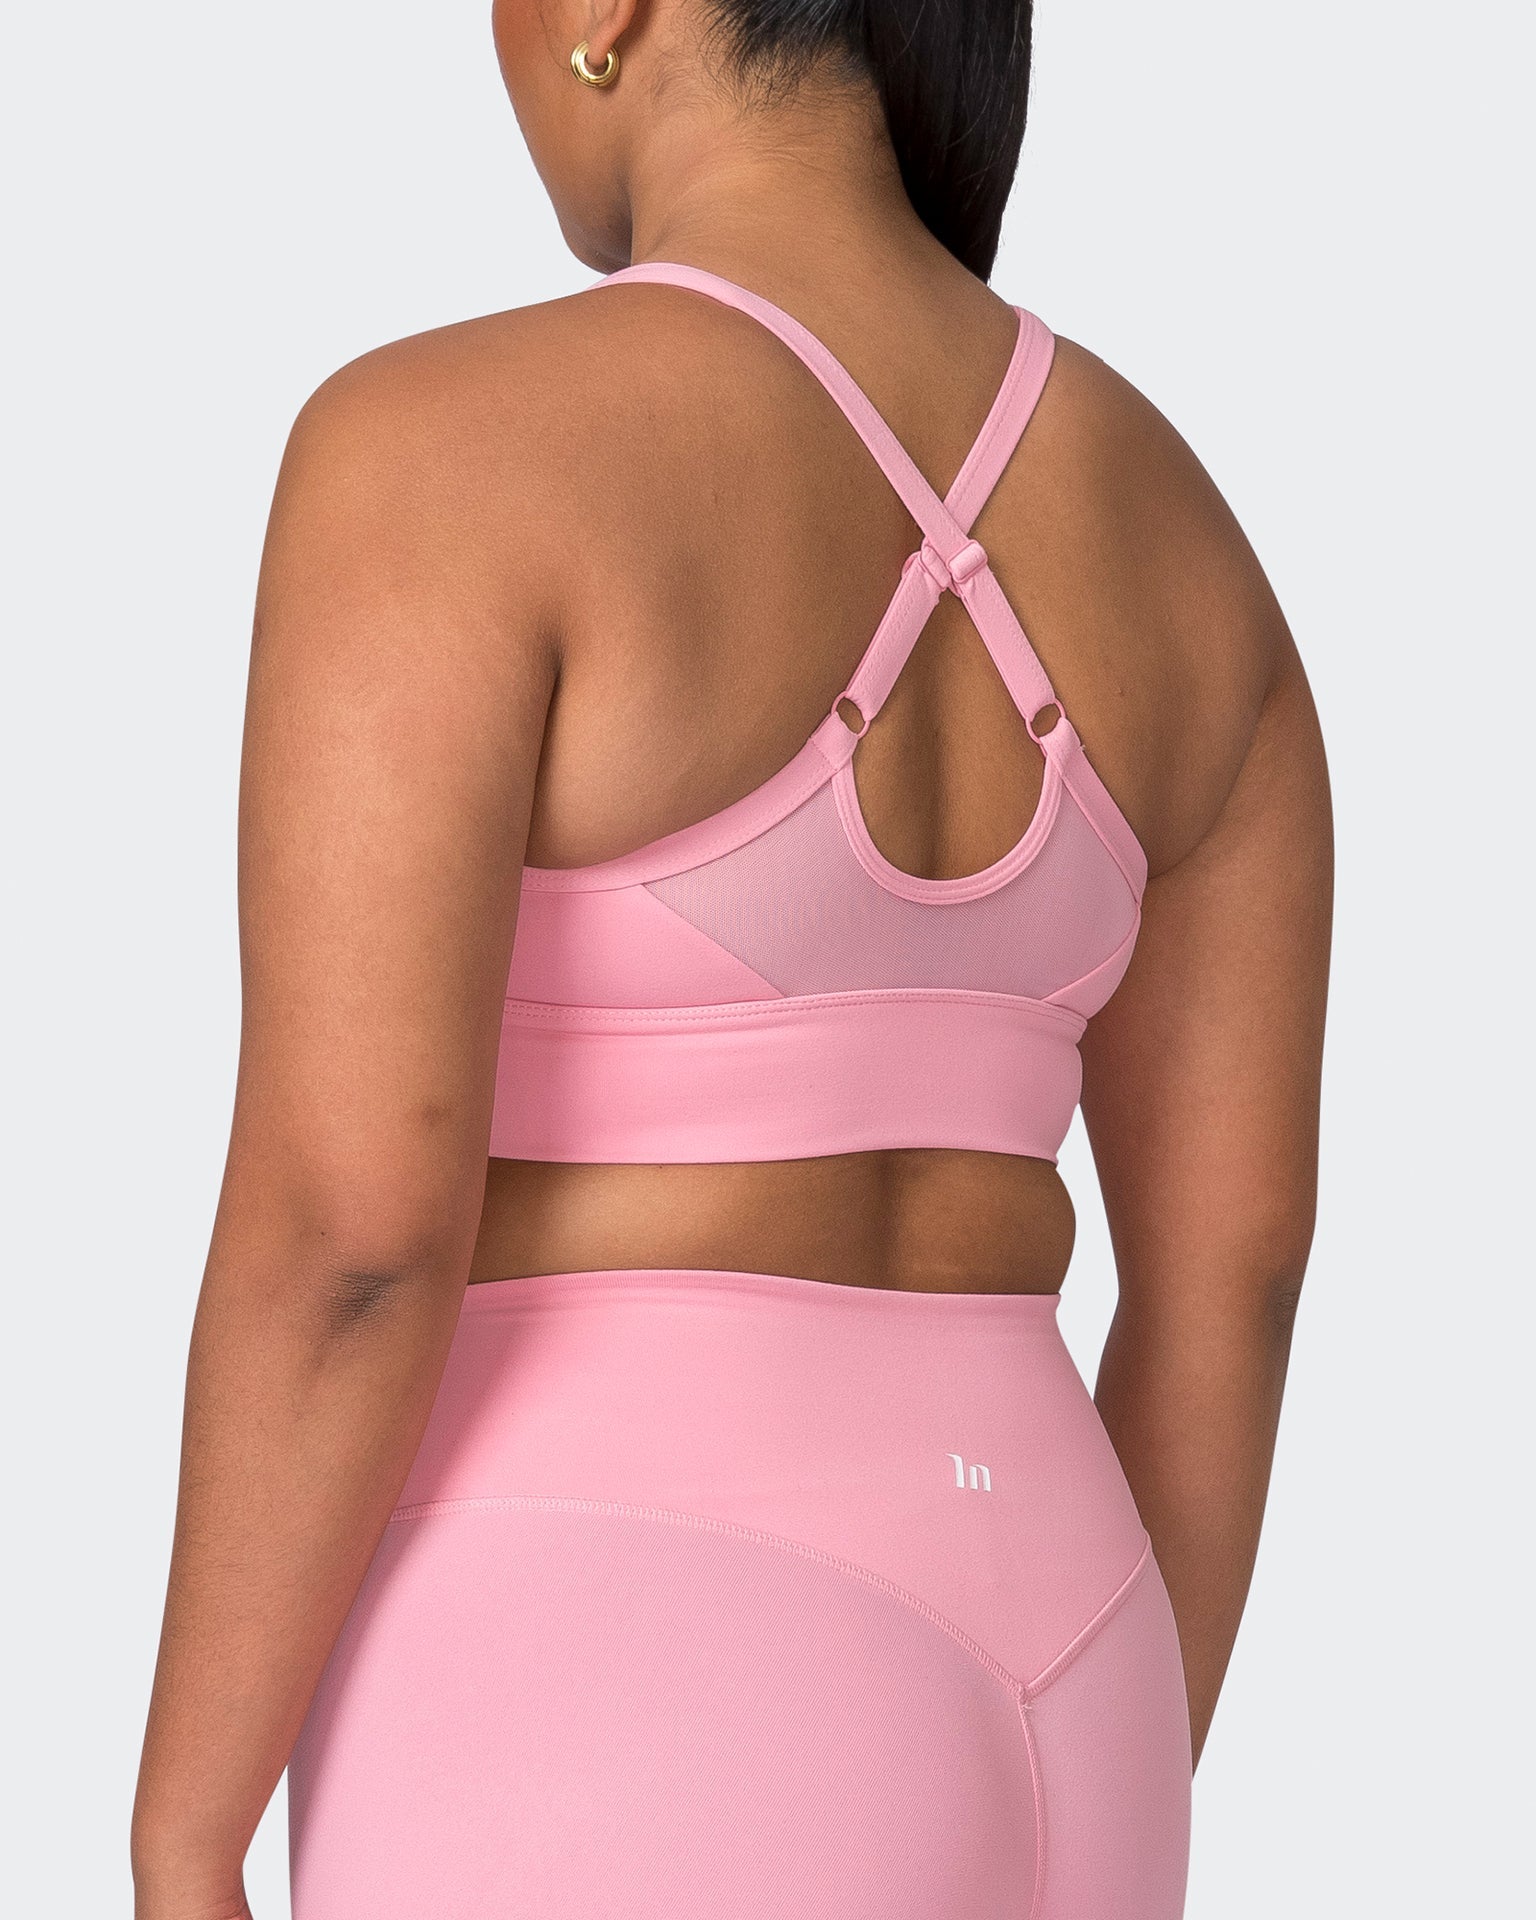 Muscle Nation Sports Bras Replay Bra - Strawberry Pink